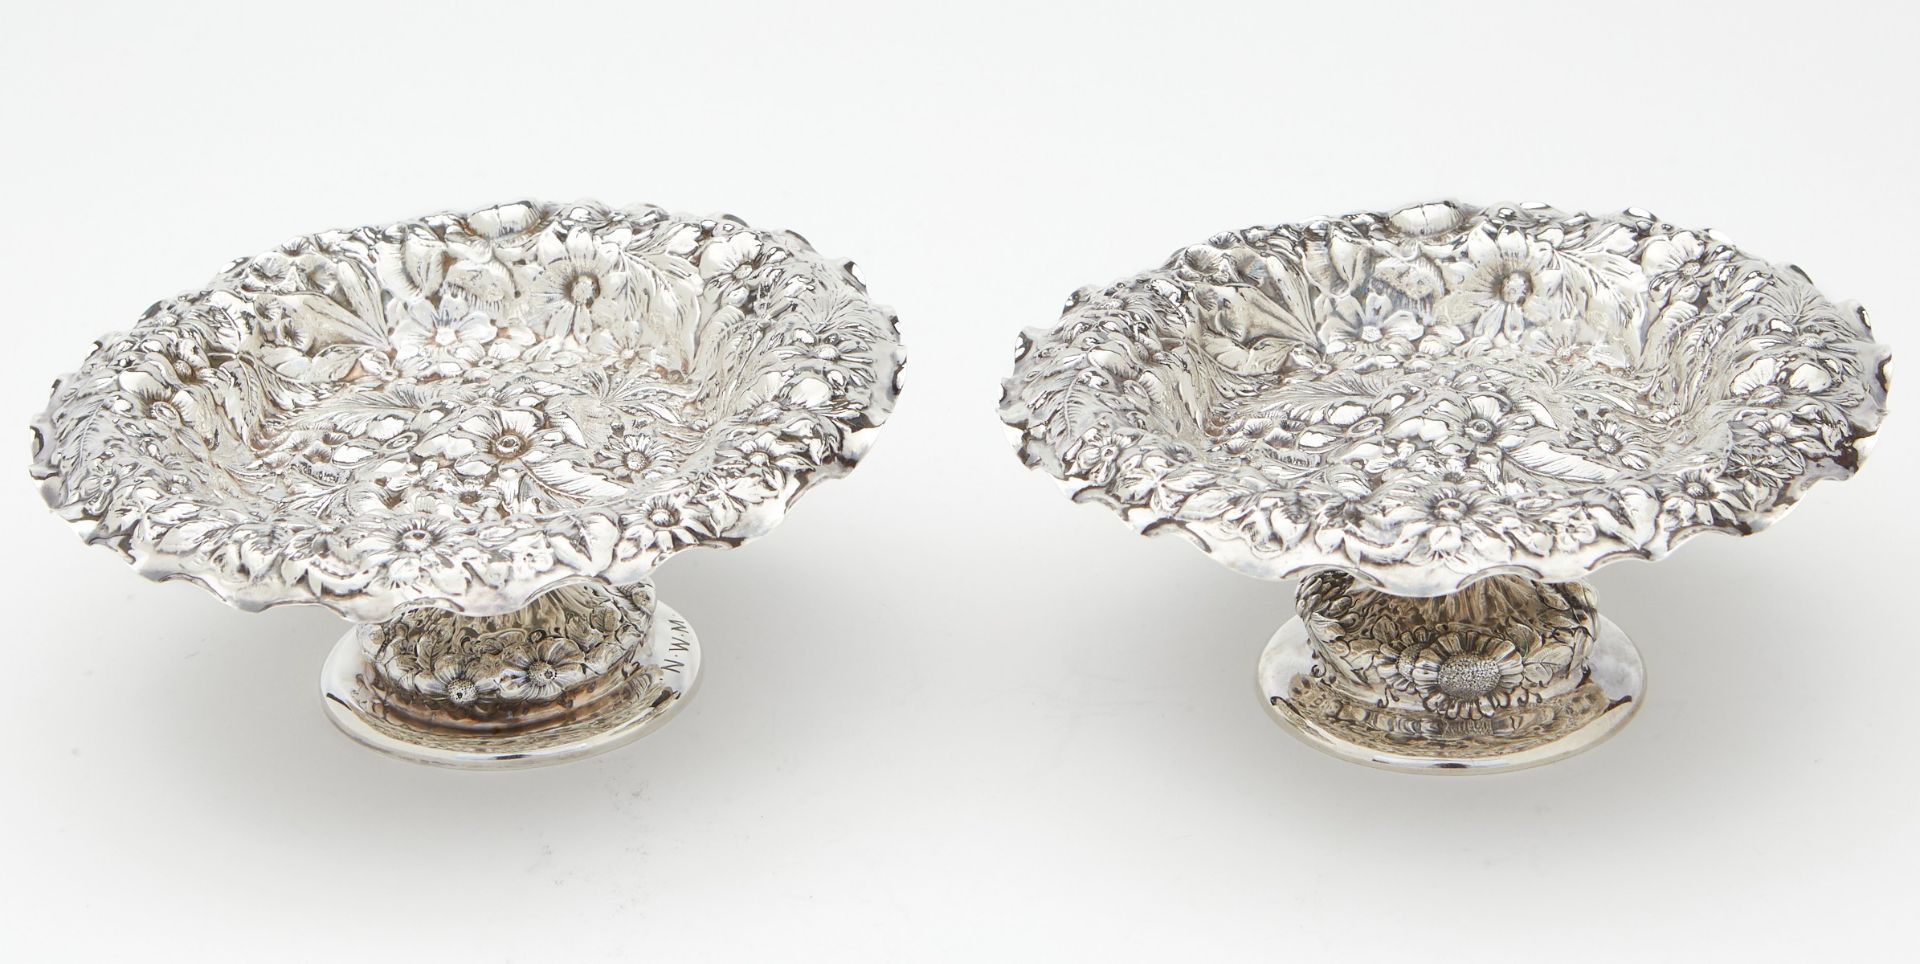 Pr: George W Shiebler Sterling Repousse Dish